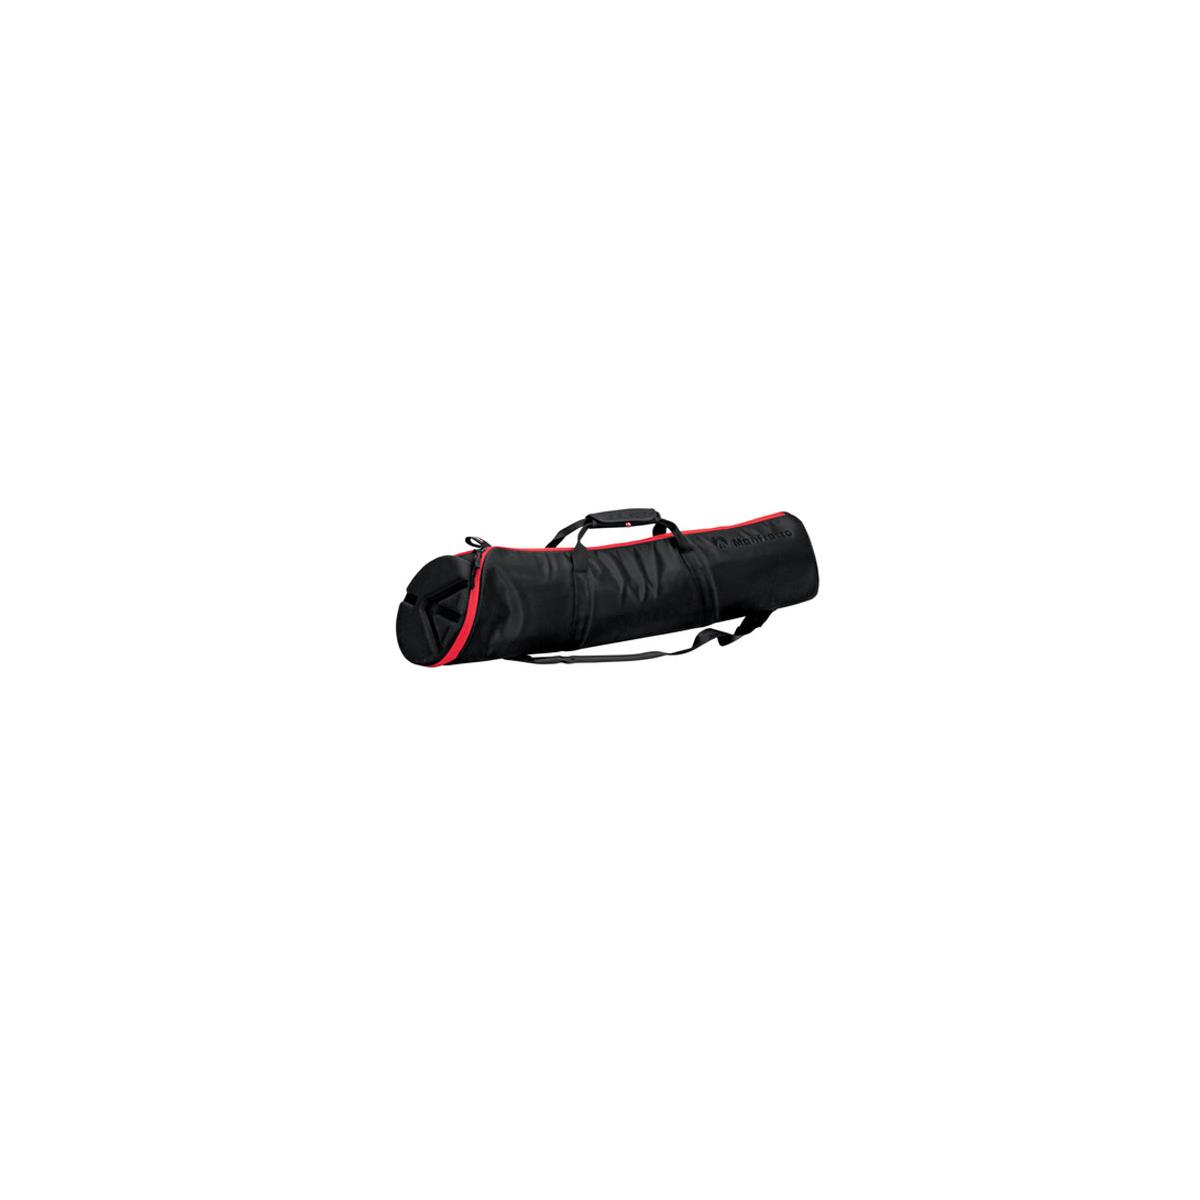 Manfrotto MBAG100PN Padded Tripod Bag